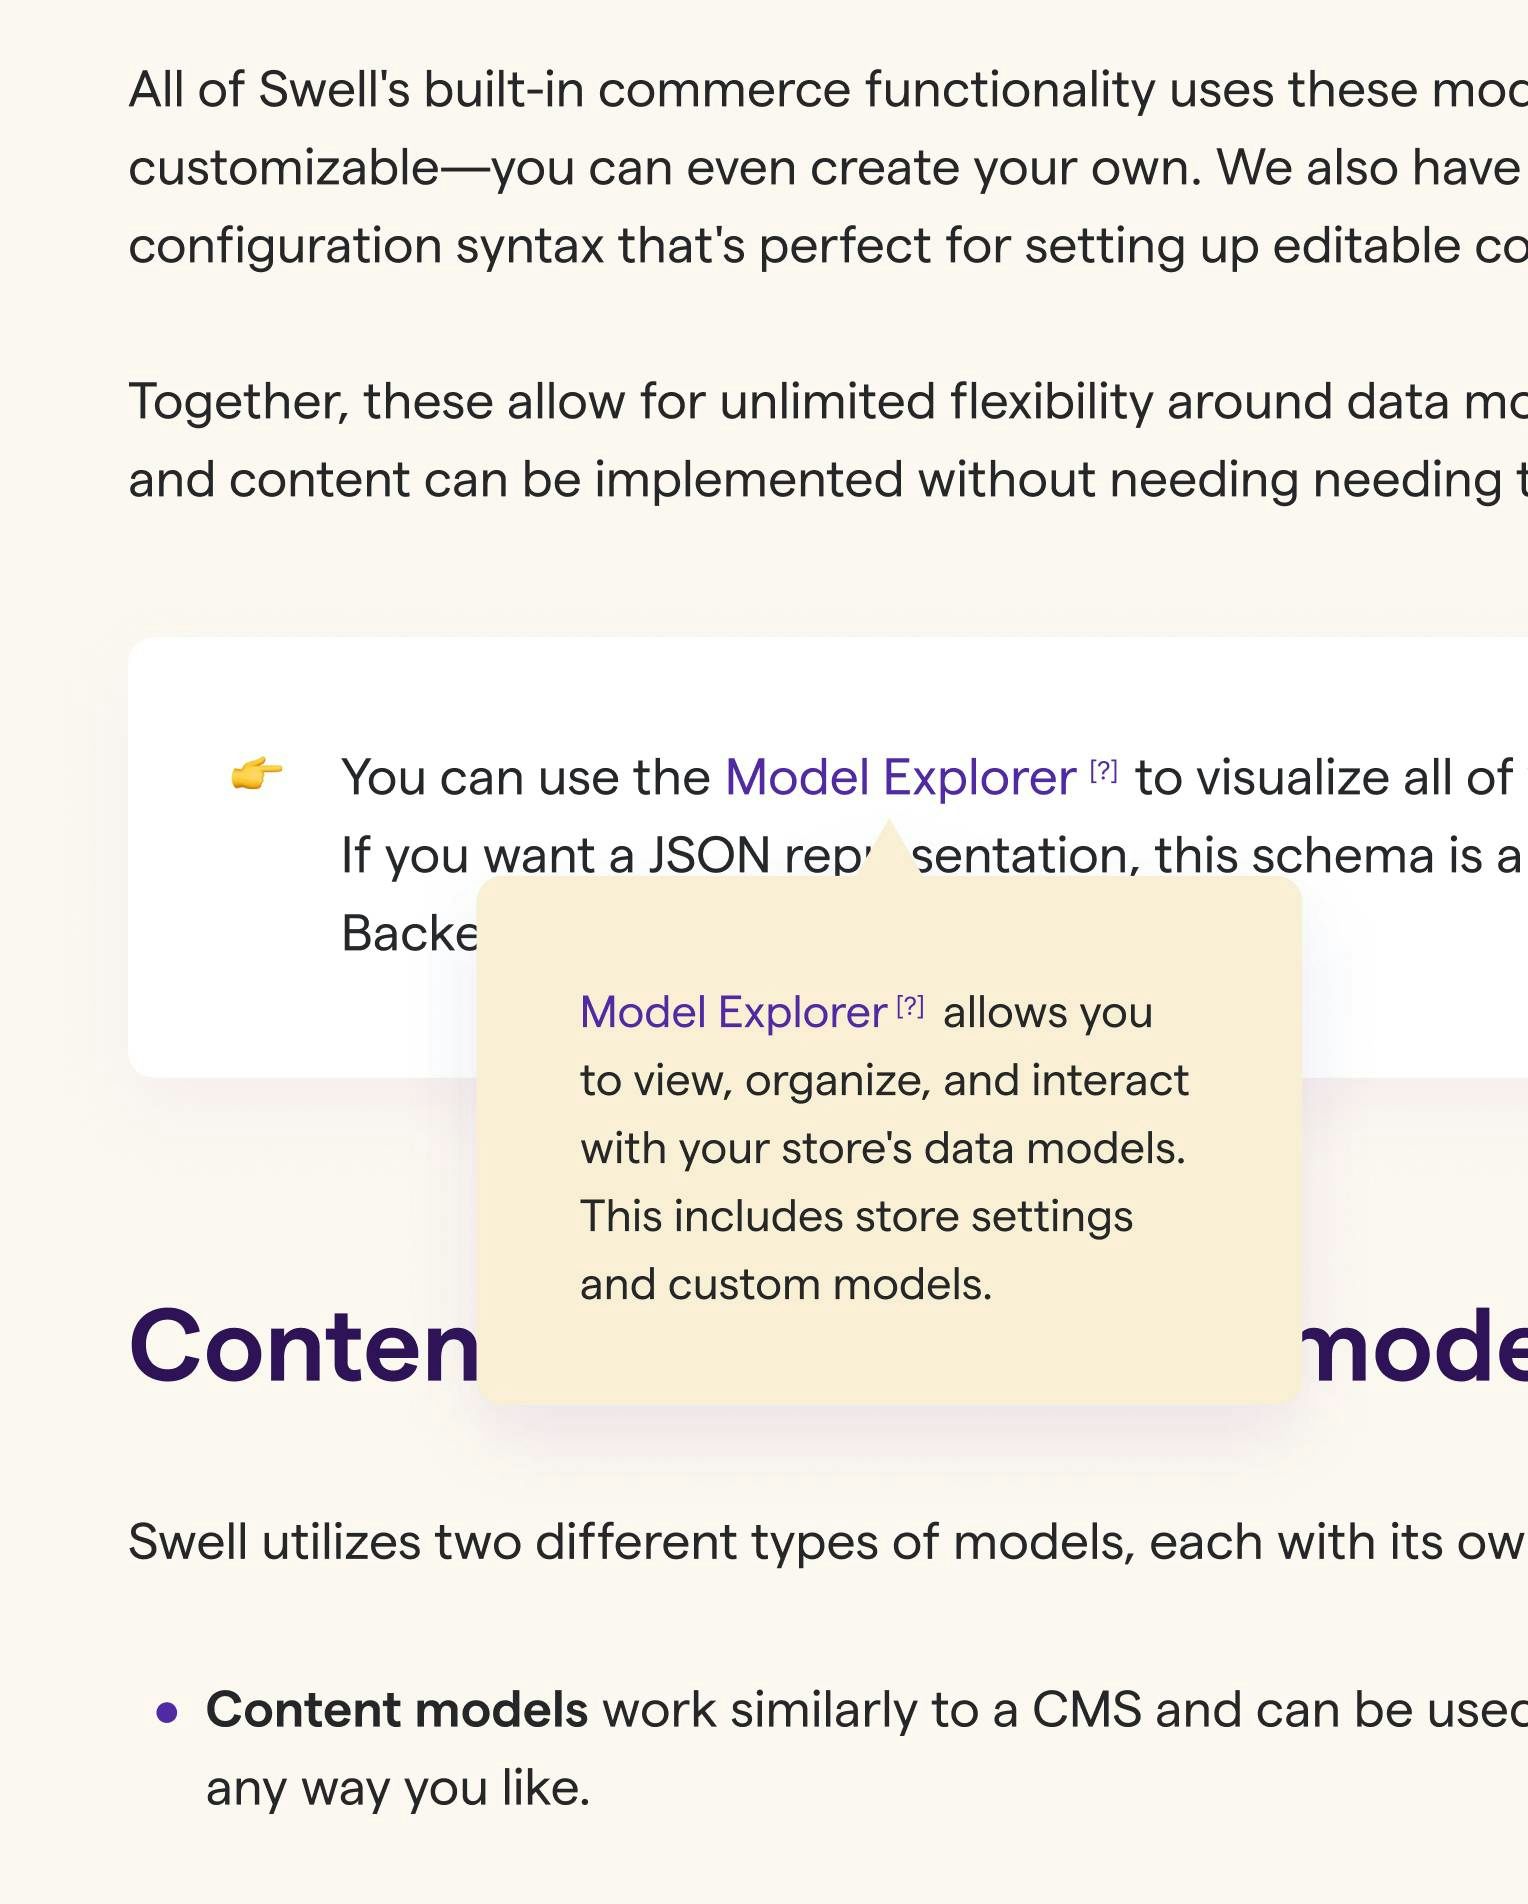 Tooltip expanded and explaining what a Model Explorer is